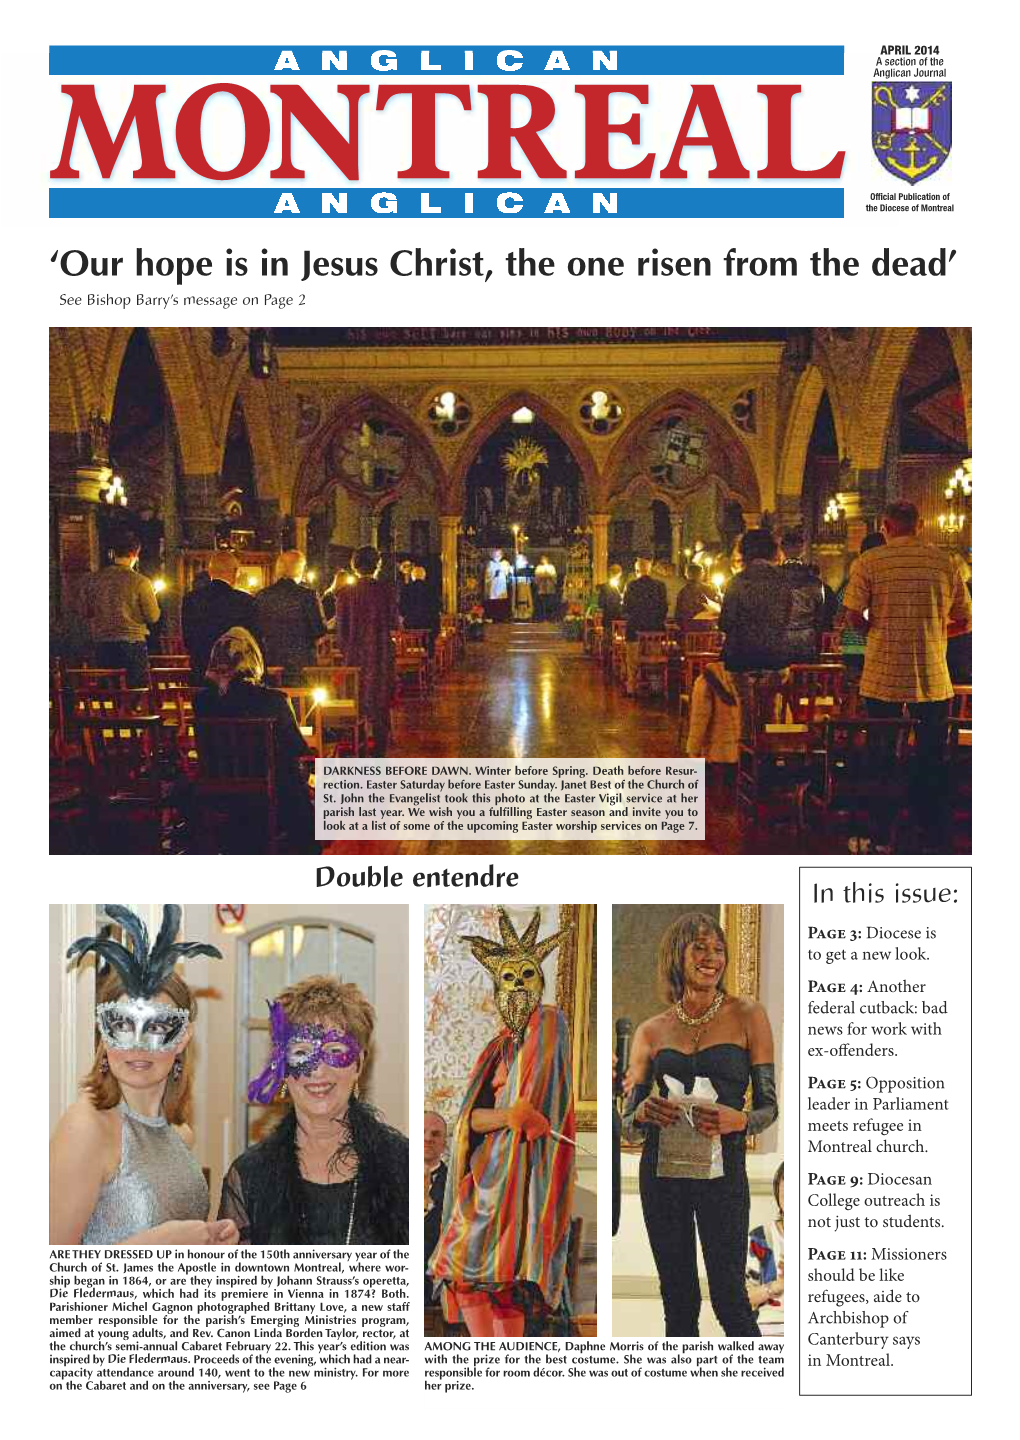 APRIL 20 14 a Section of the ANGLICAN Anglican Journal